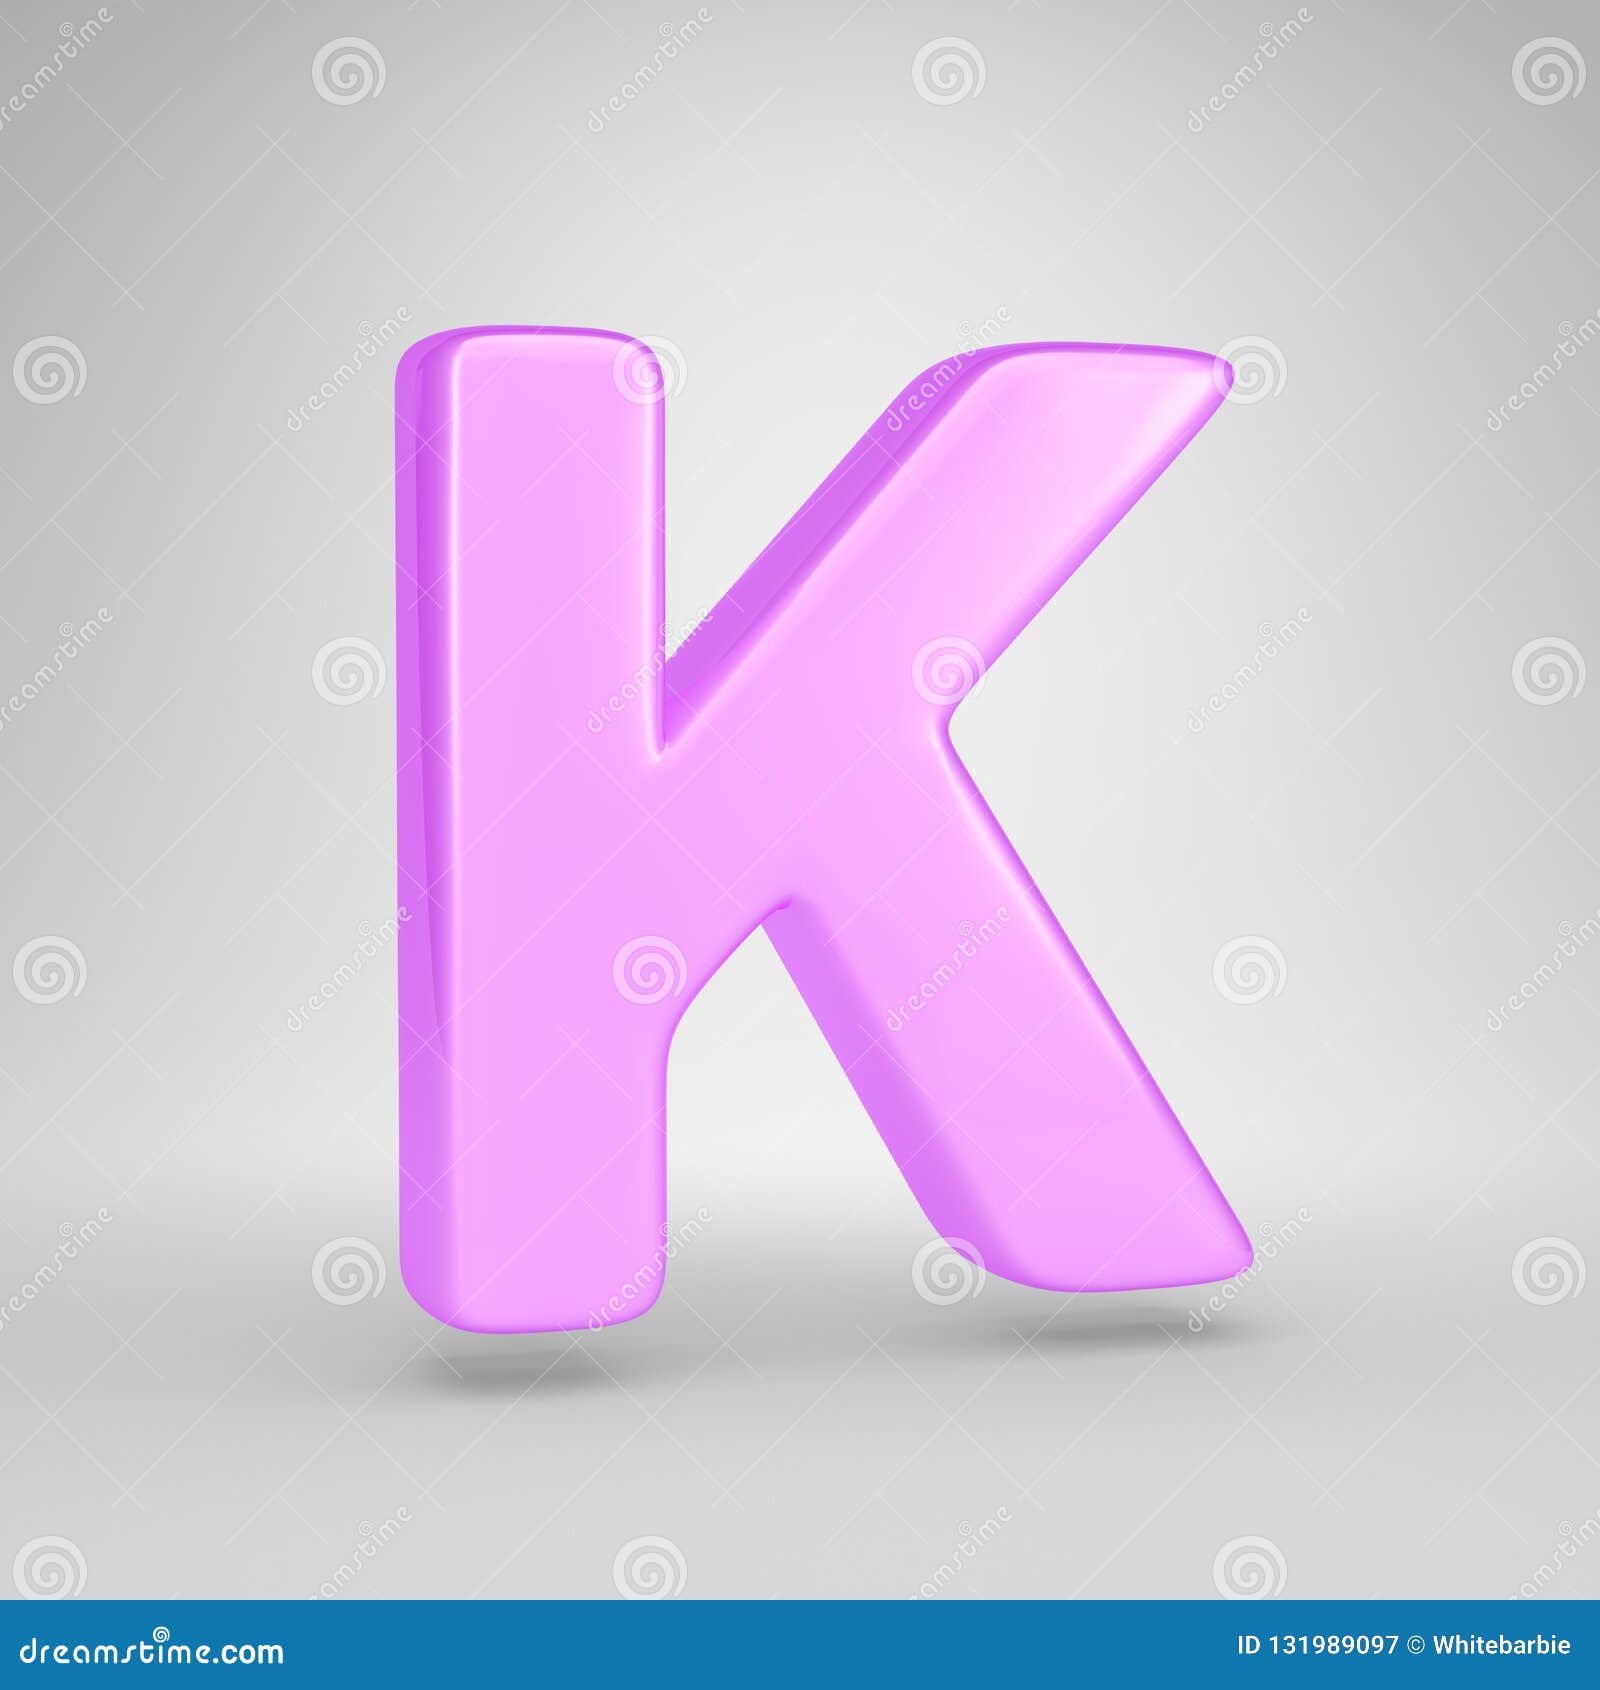 Glossy Pink Bubble Gum Letter K Uppercase Isolated on White Background ...